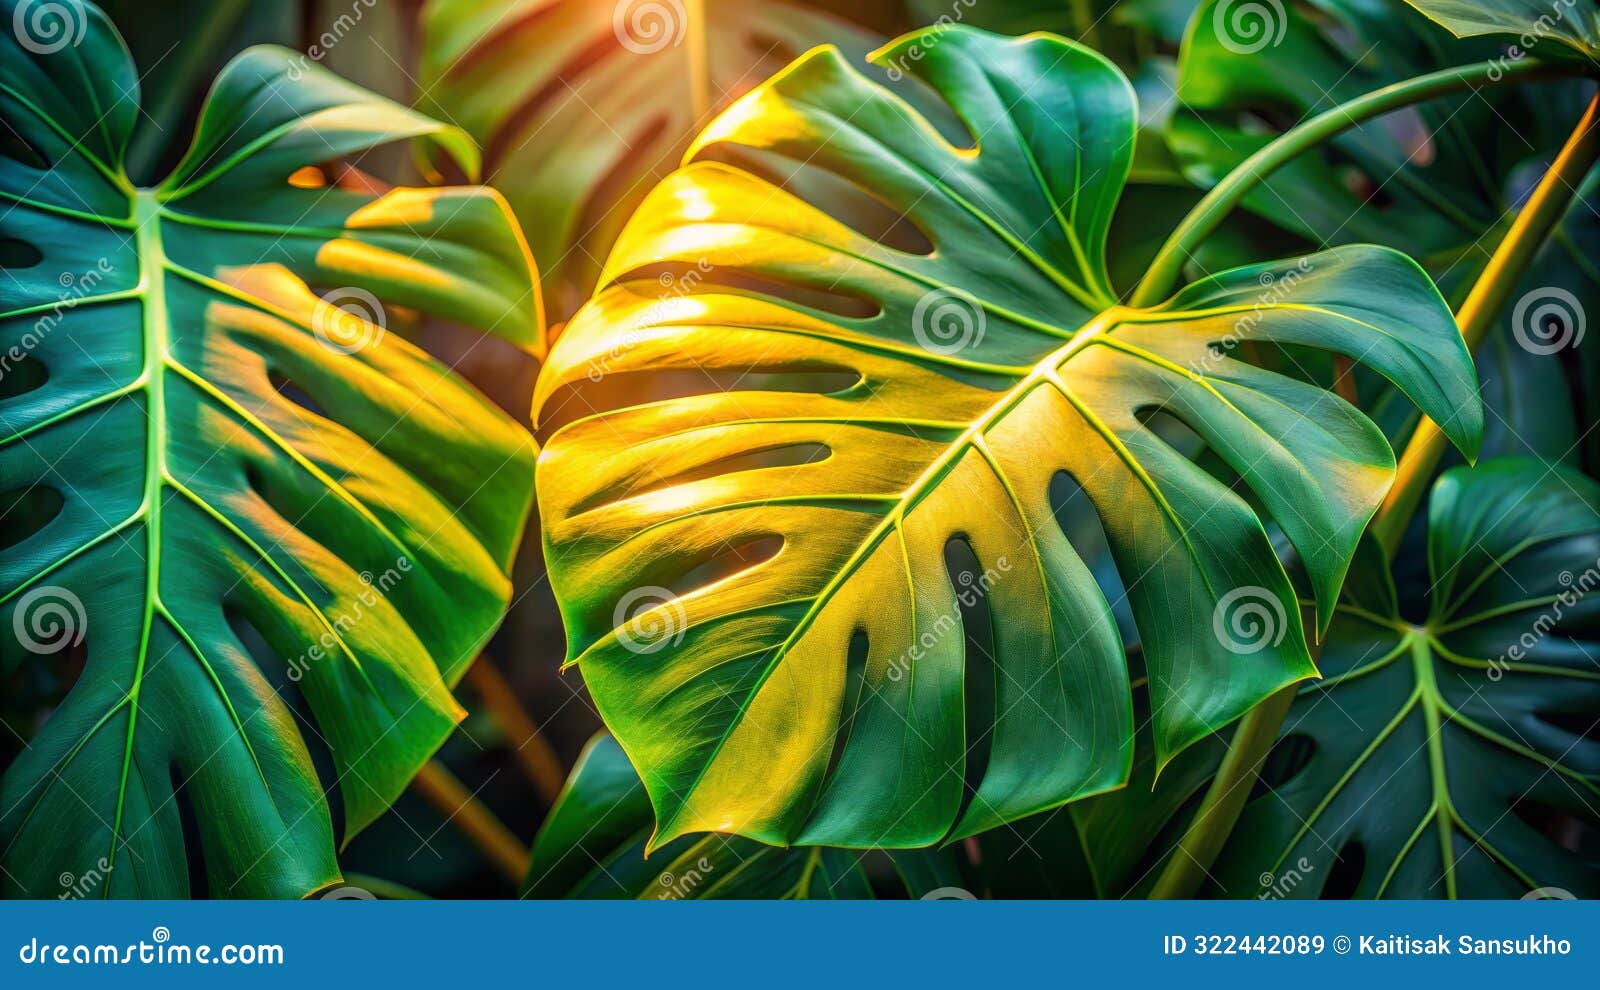 the monstera deliciosa, also known as the swiss cheese plant, is a species of flowering plant native to tropical forests in